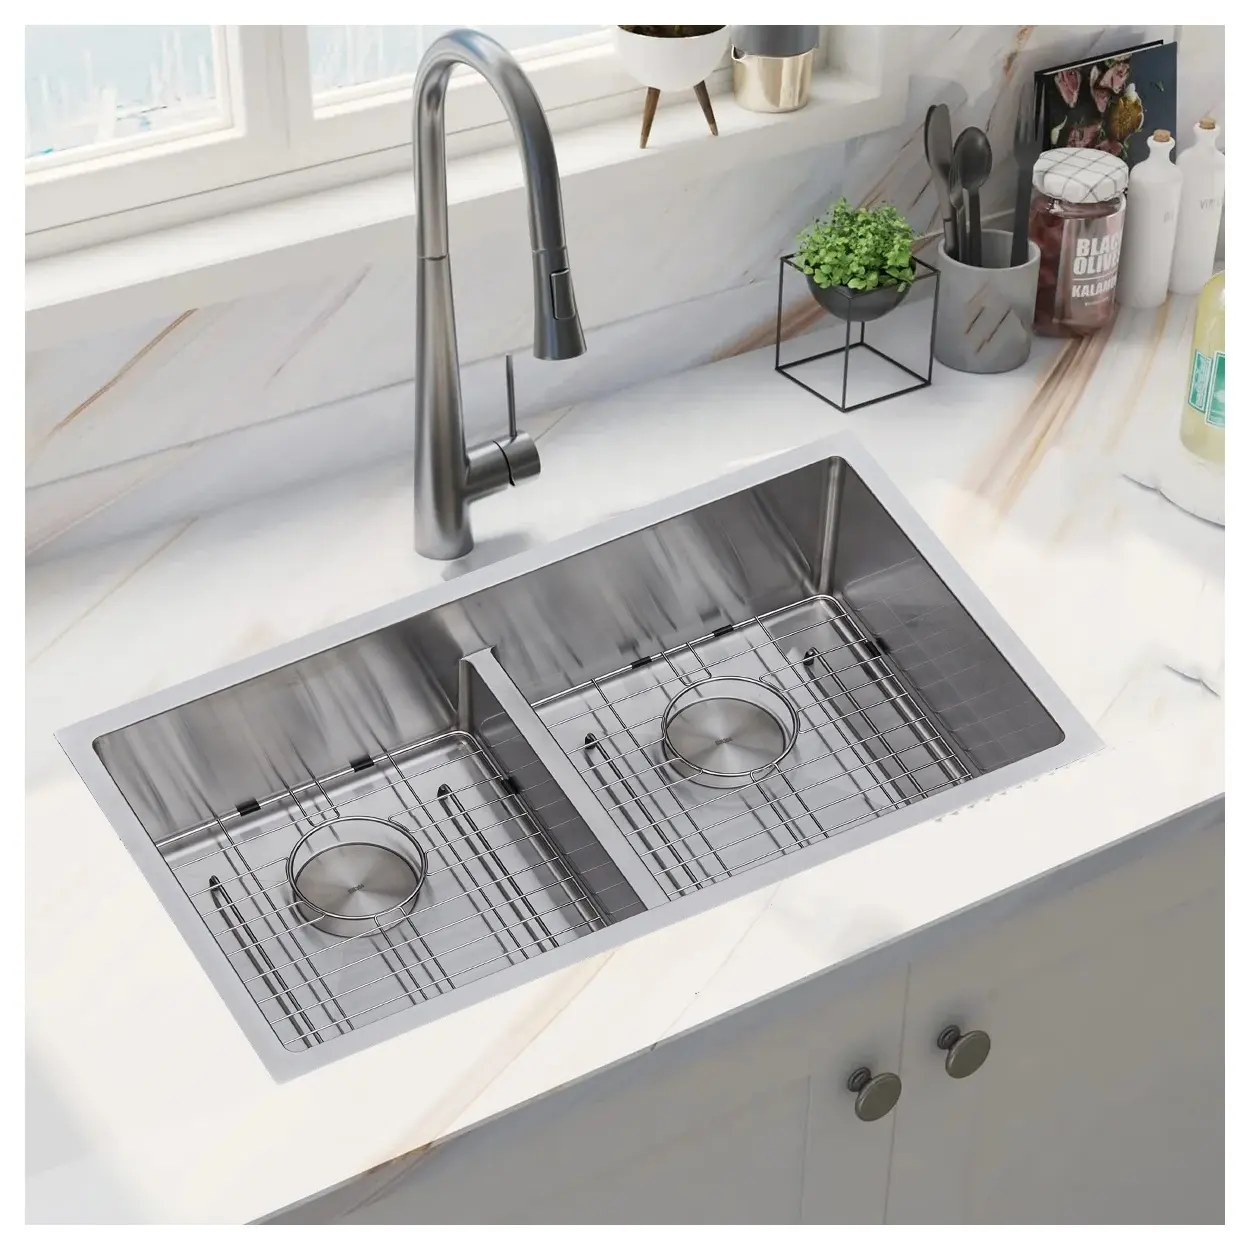 Stainless Steel Double Bowl Kitchen Sinks With Grid Functional Kitchen Sink High Grade Sinks